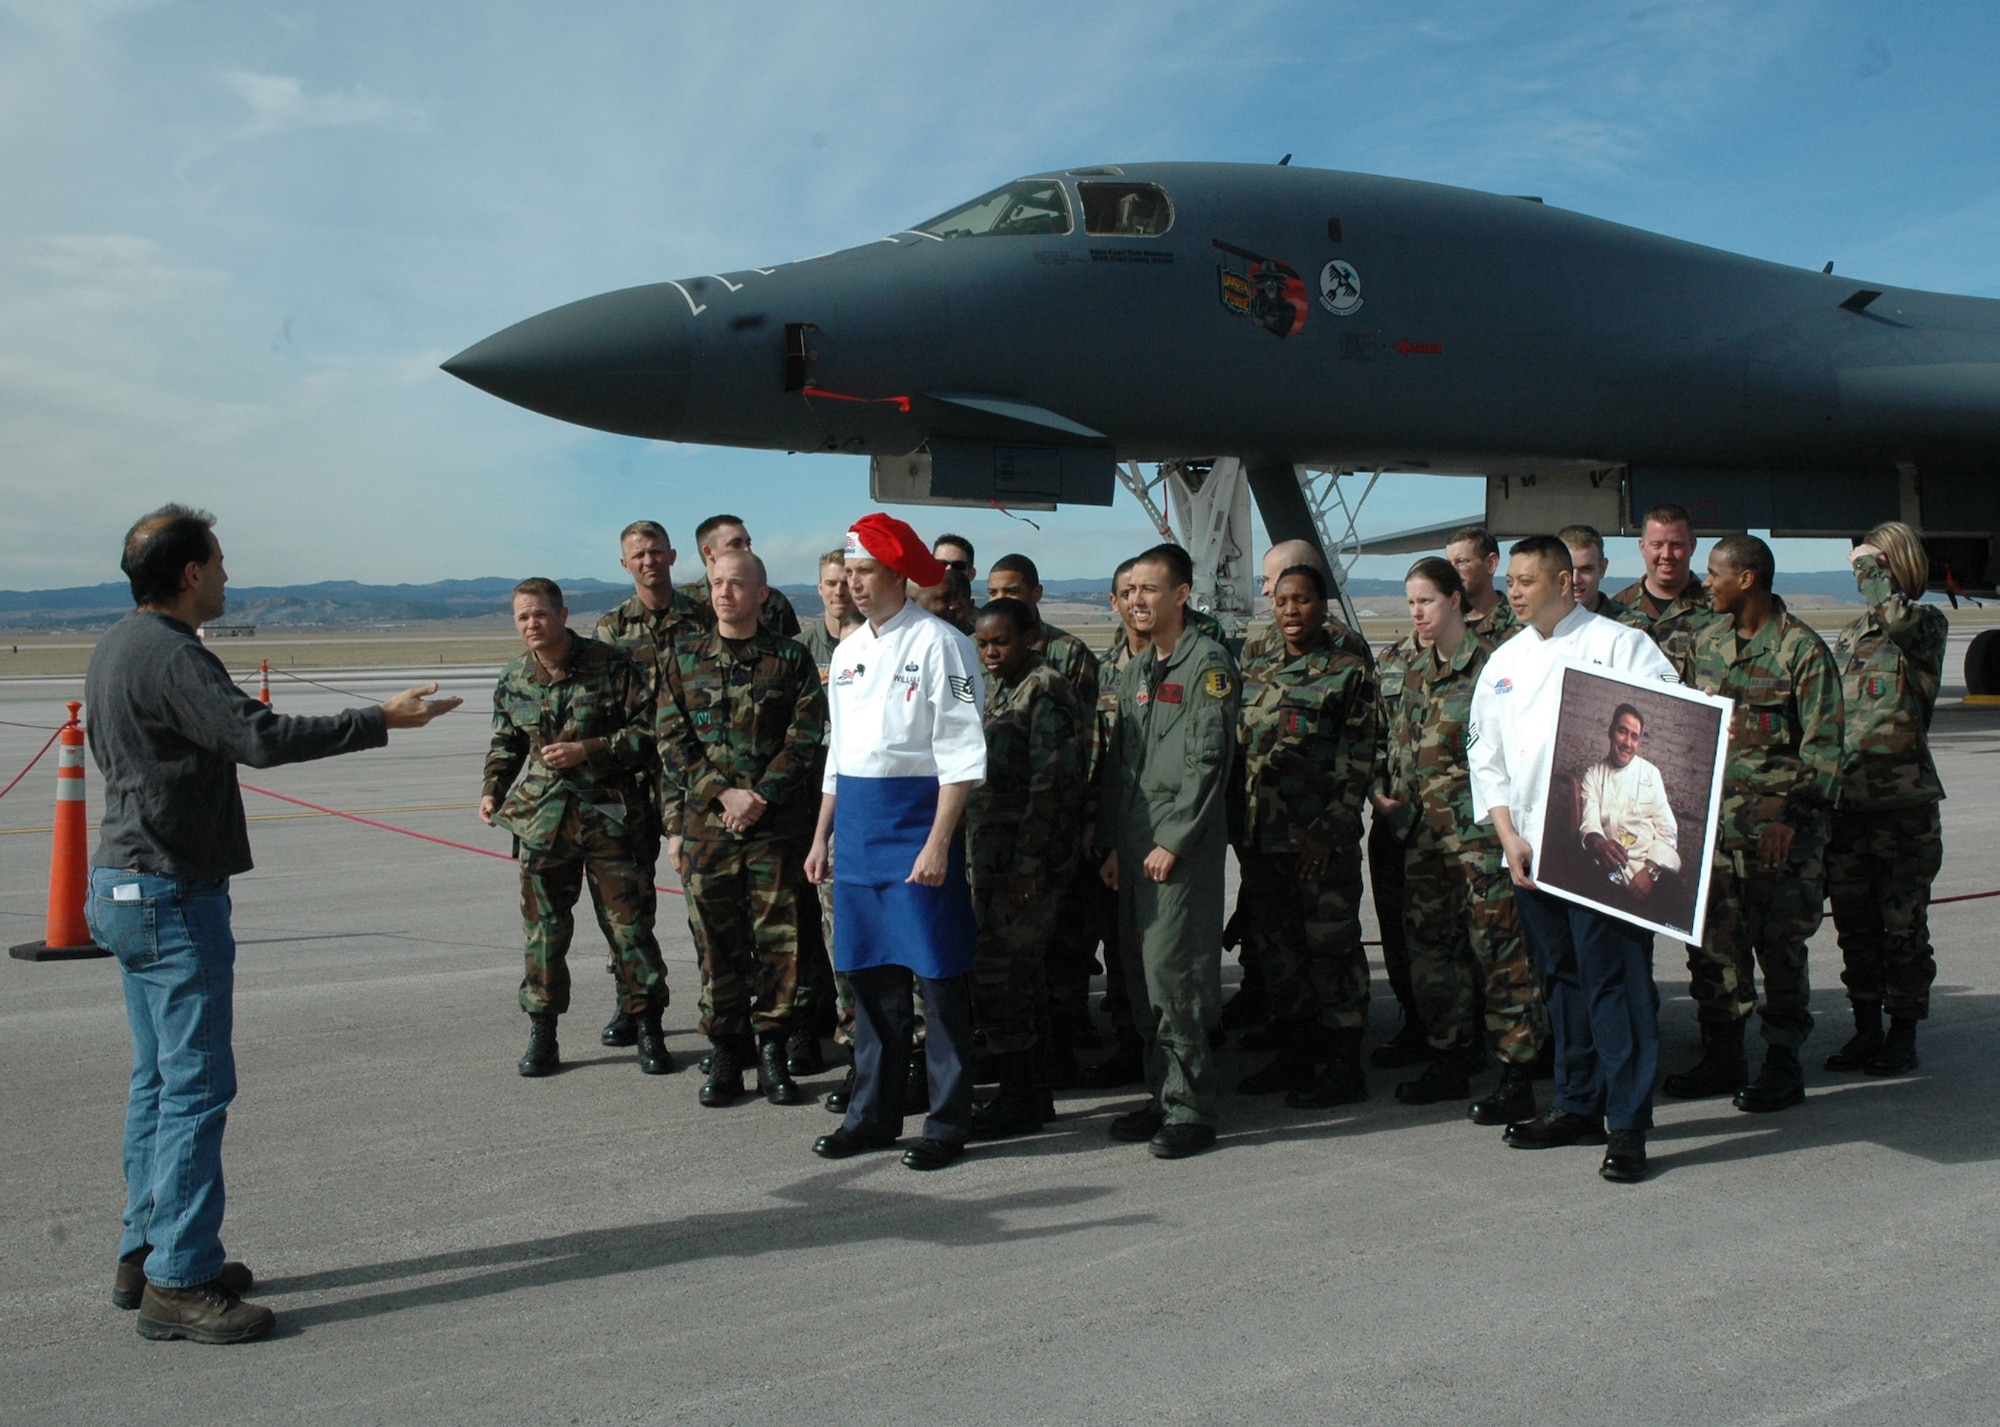 Alan Madison, Emeril Live producer, briefs a crowd of Ellsworth's Airmen in front of a B-1 to film an opening shot for the Emeril Live show. On Mr. Madison's cue, Tech. Sgt. Wesley Williams, dining facility manager here and winner of the Emeril Live military chef contest, challenged Emeril to successfully copy his recipe. After Sergeant Williams threw down the culinary gauntlet, the group of Airmen let out a resounding BAM across Ellsworth’s flightline.